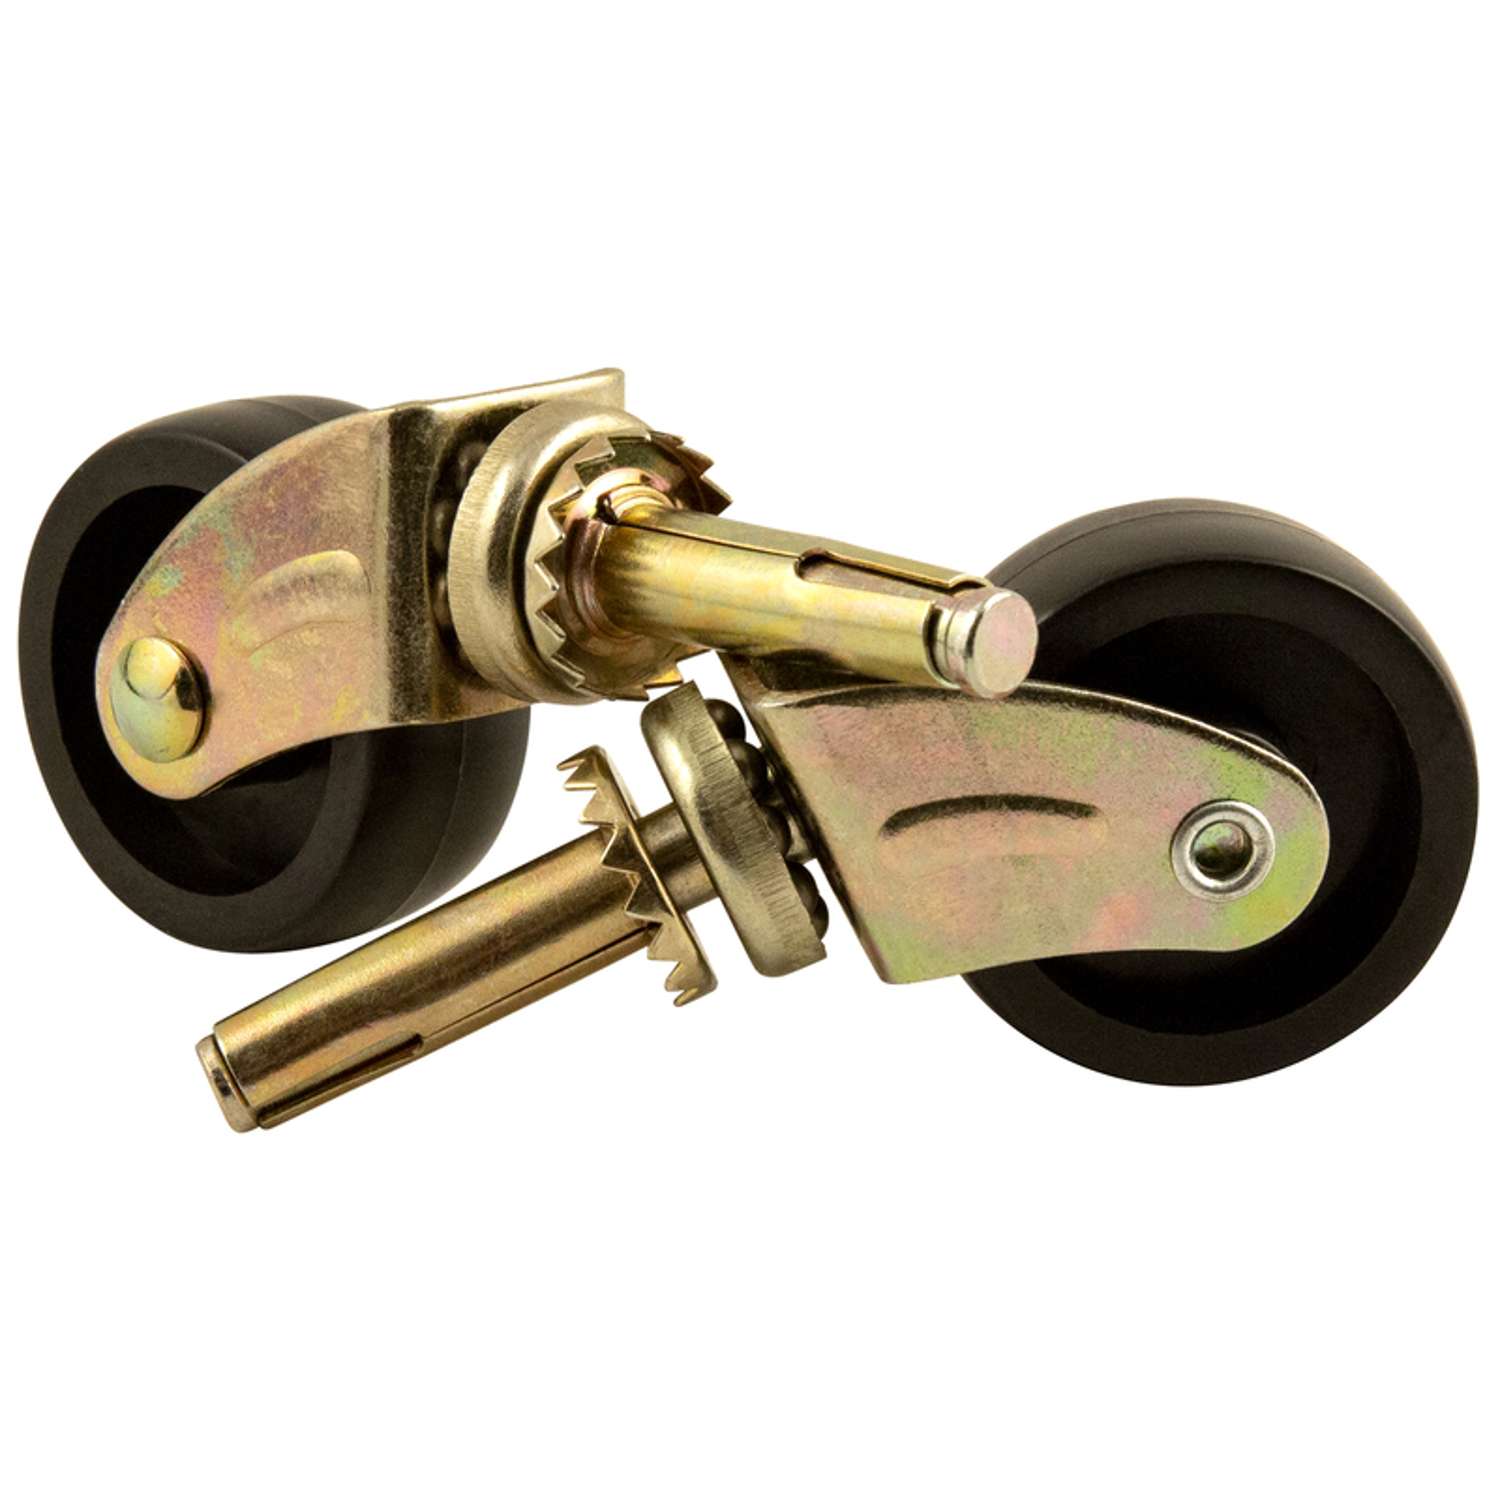 Softtouch 1.62 in. D Swivel Plastic Caster 50 lb 2 pk - Ace Hardware